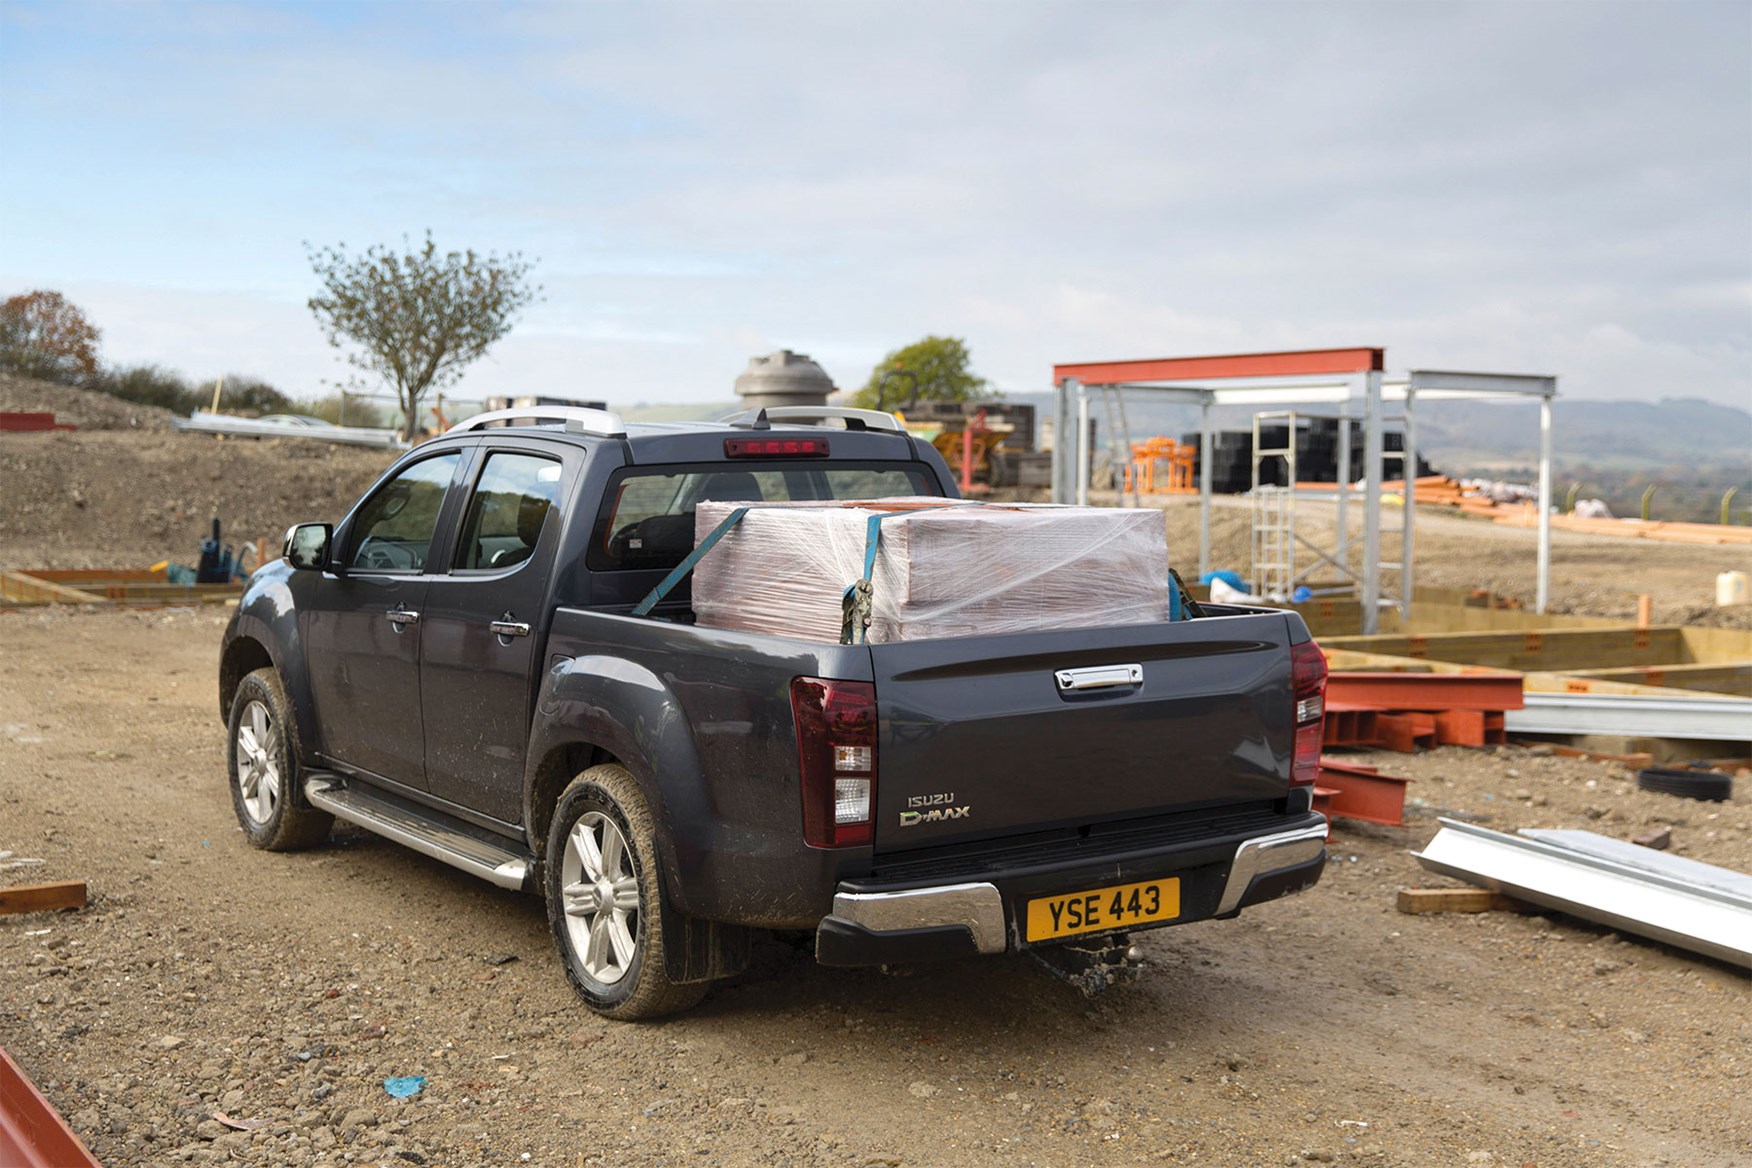 Isuzu D-Max load area dimensions, rear view, load bed fully loaded